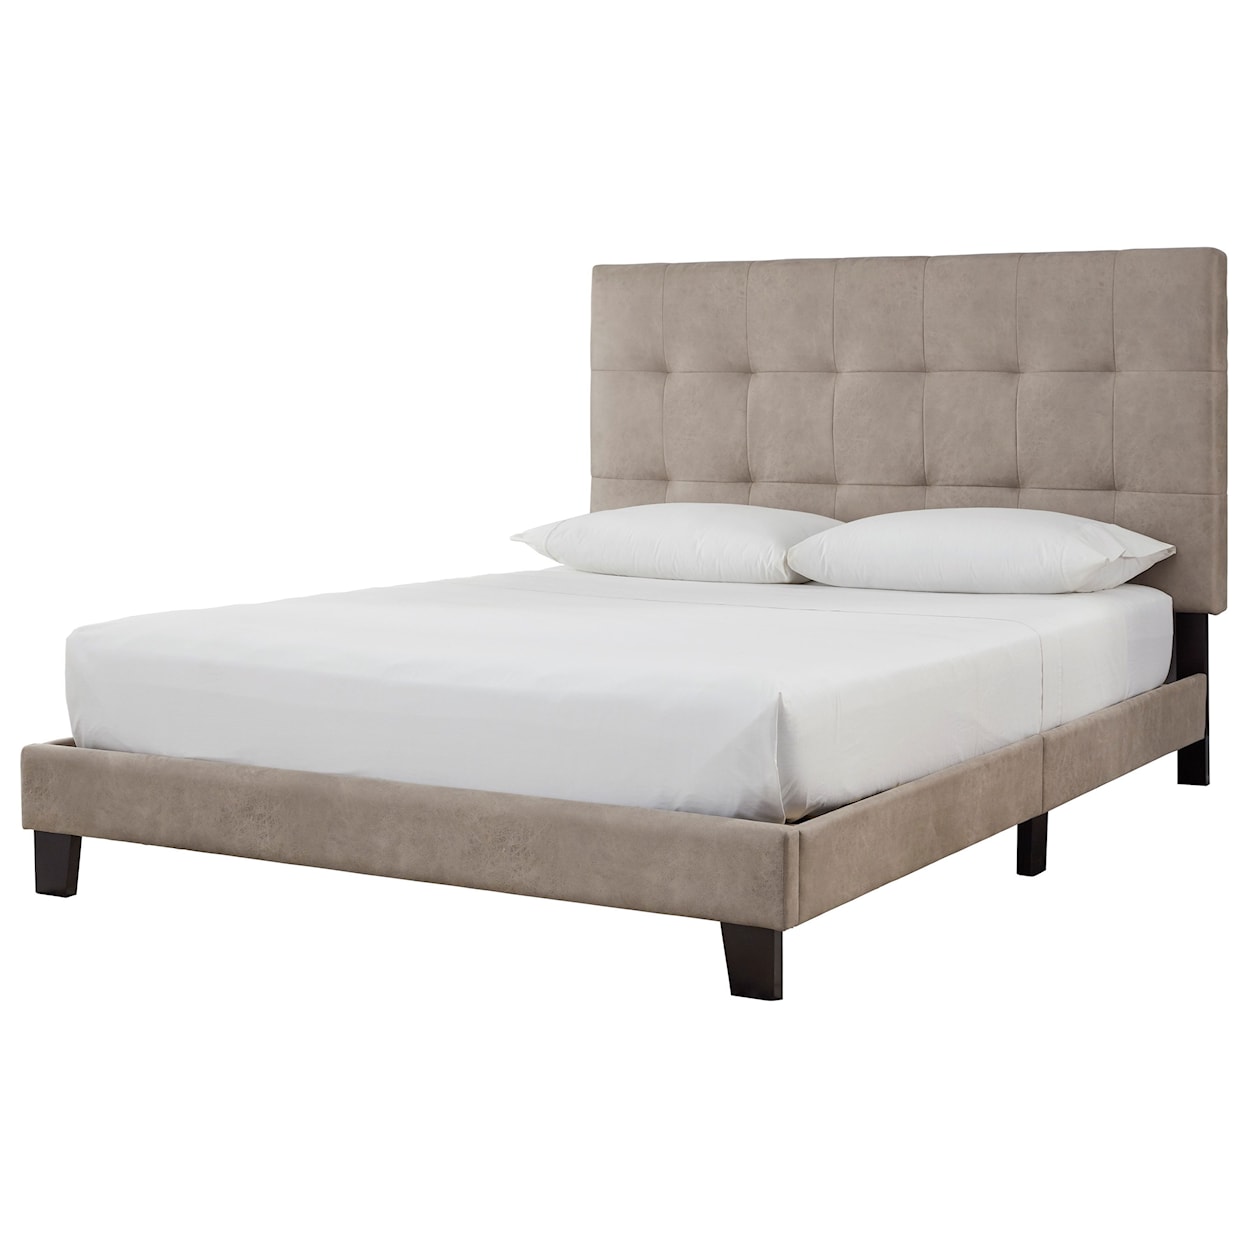 Ashley Signature Design Adelloni Queen Upholstered Bed